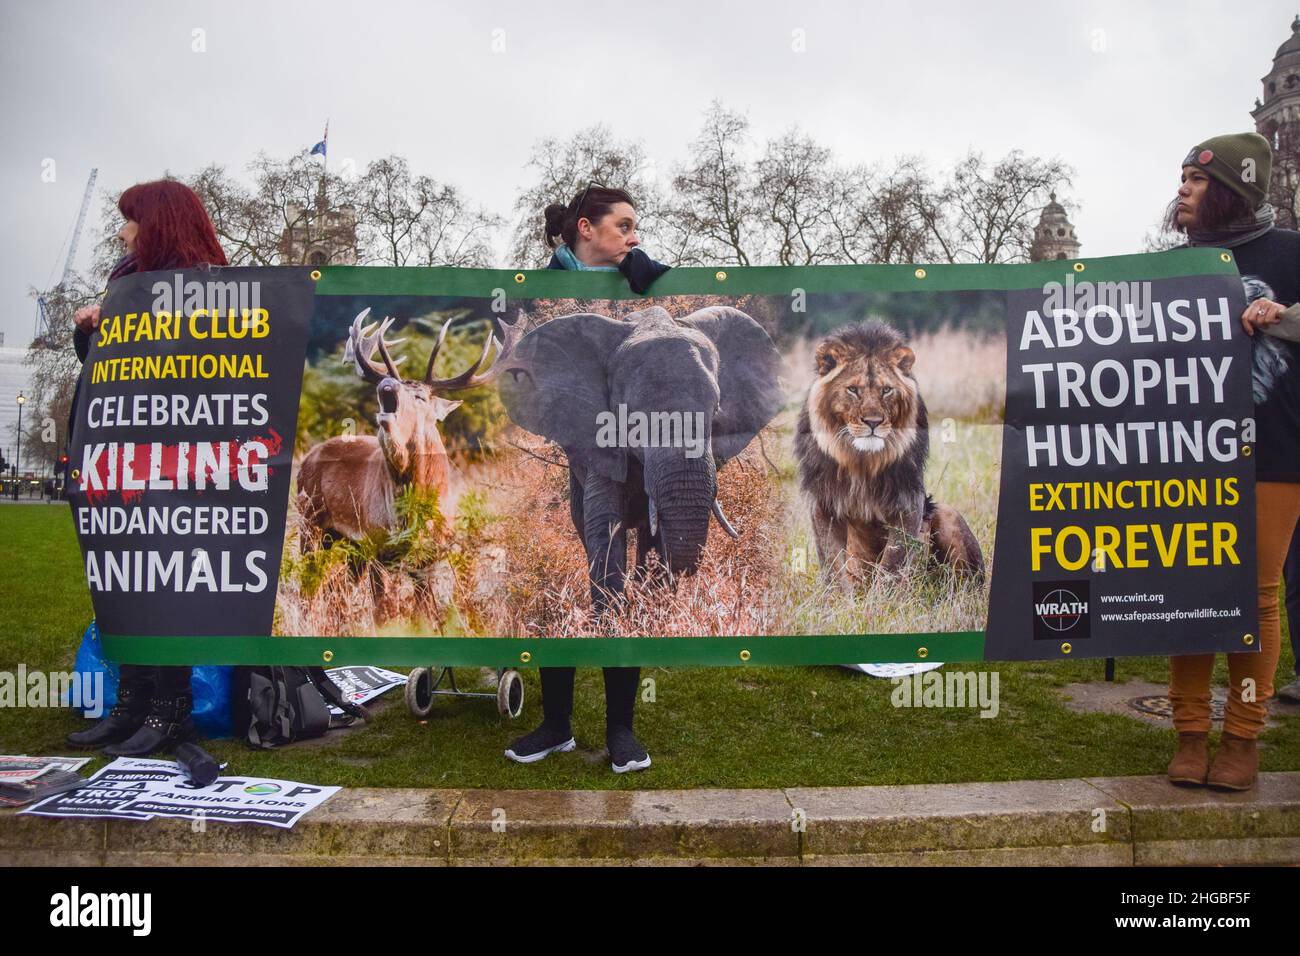 London, UK. 19th Jan, 2022. Protesters hold an anti-trophy hunting banner during the Worldwide Rally Against Trophy Hunting.Activists gathered at Parliament Square calling for a ban on trophy hunting and trophy hunting imports. (Photo by Vuk Valcic/SOPA Images/Sipa USA) Credit: Sipa USA/Alamy Live News Stock Photo